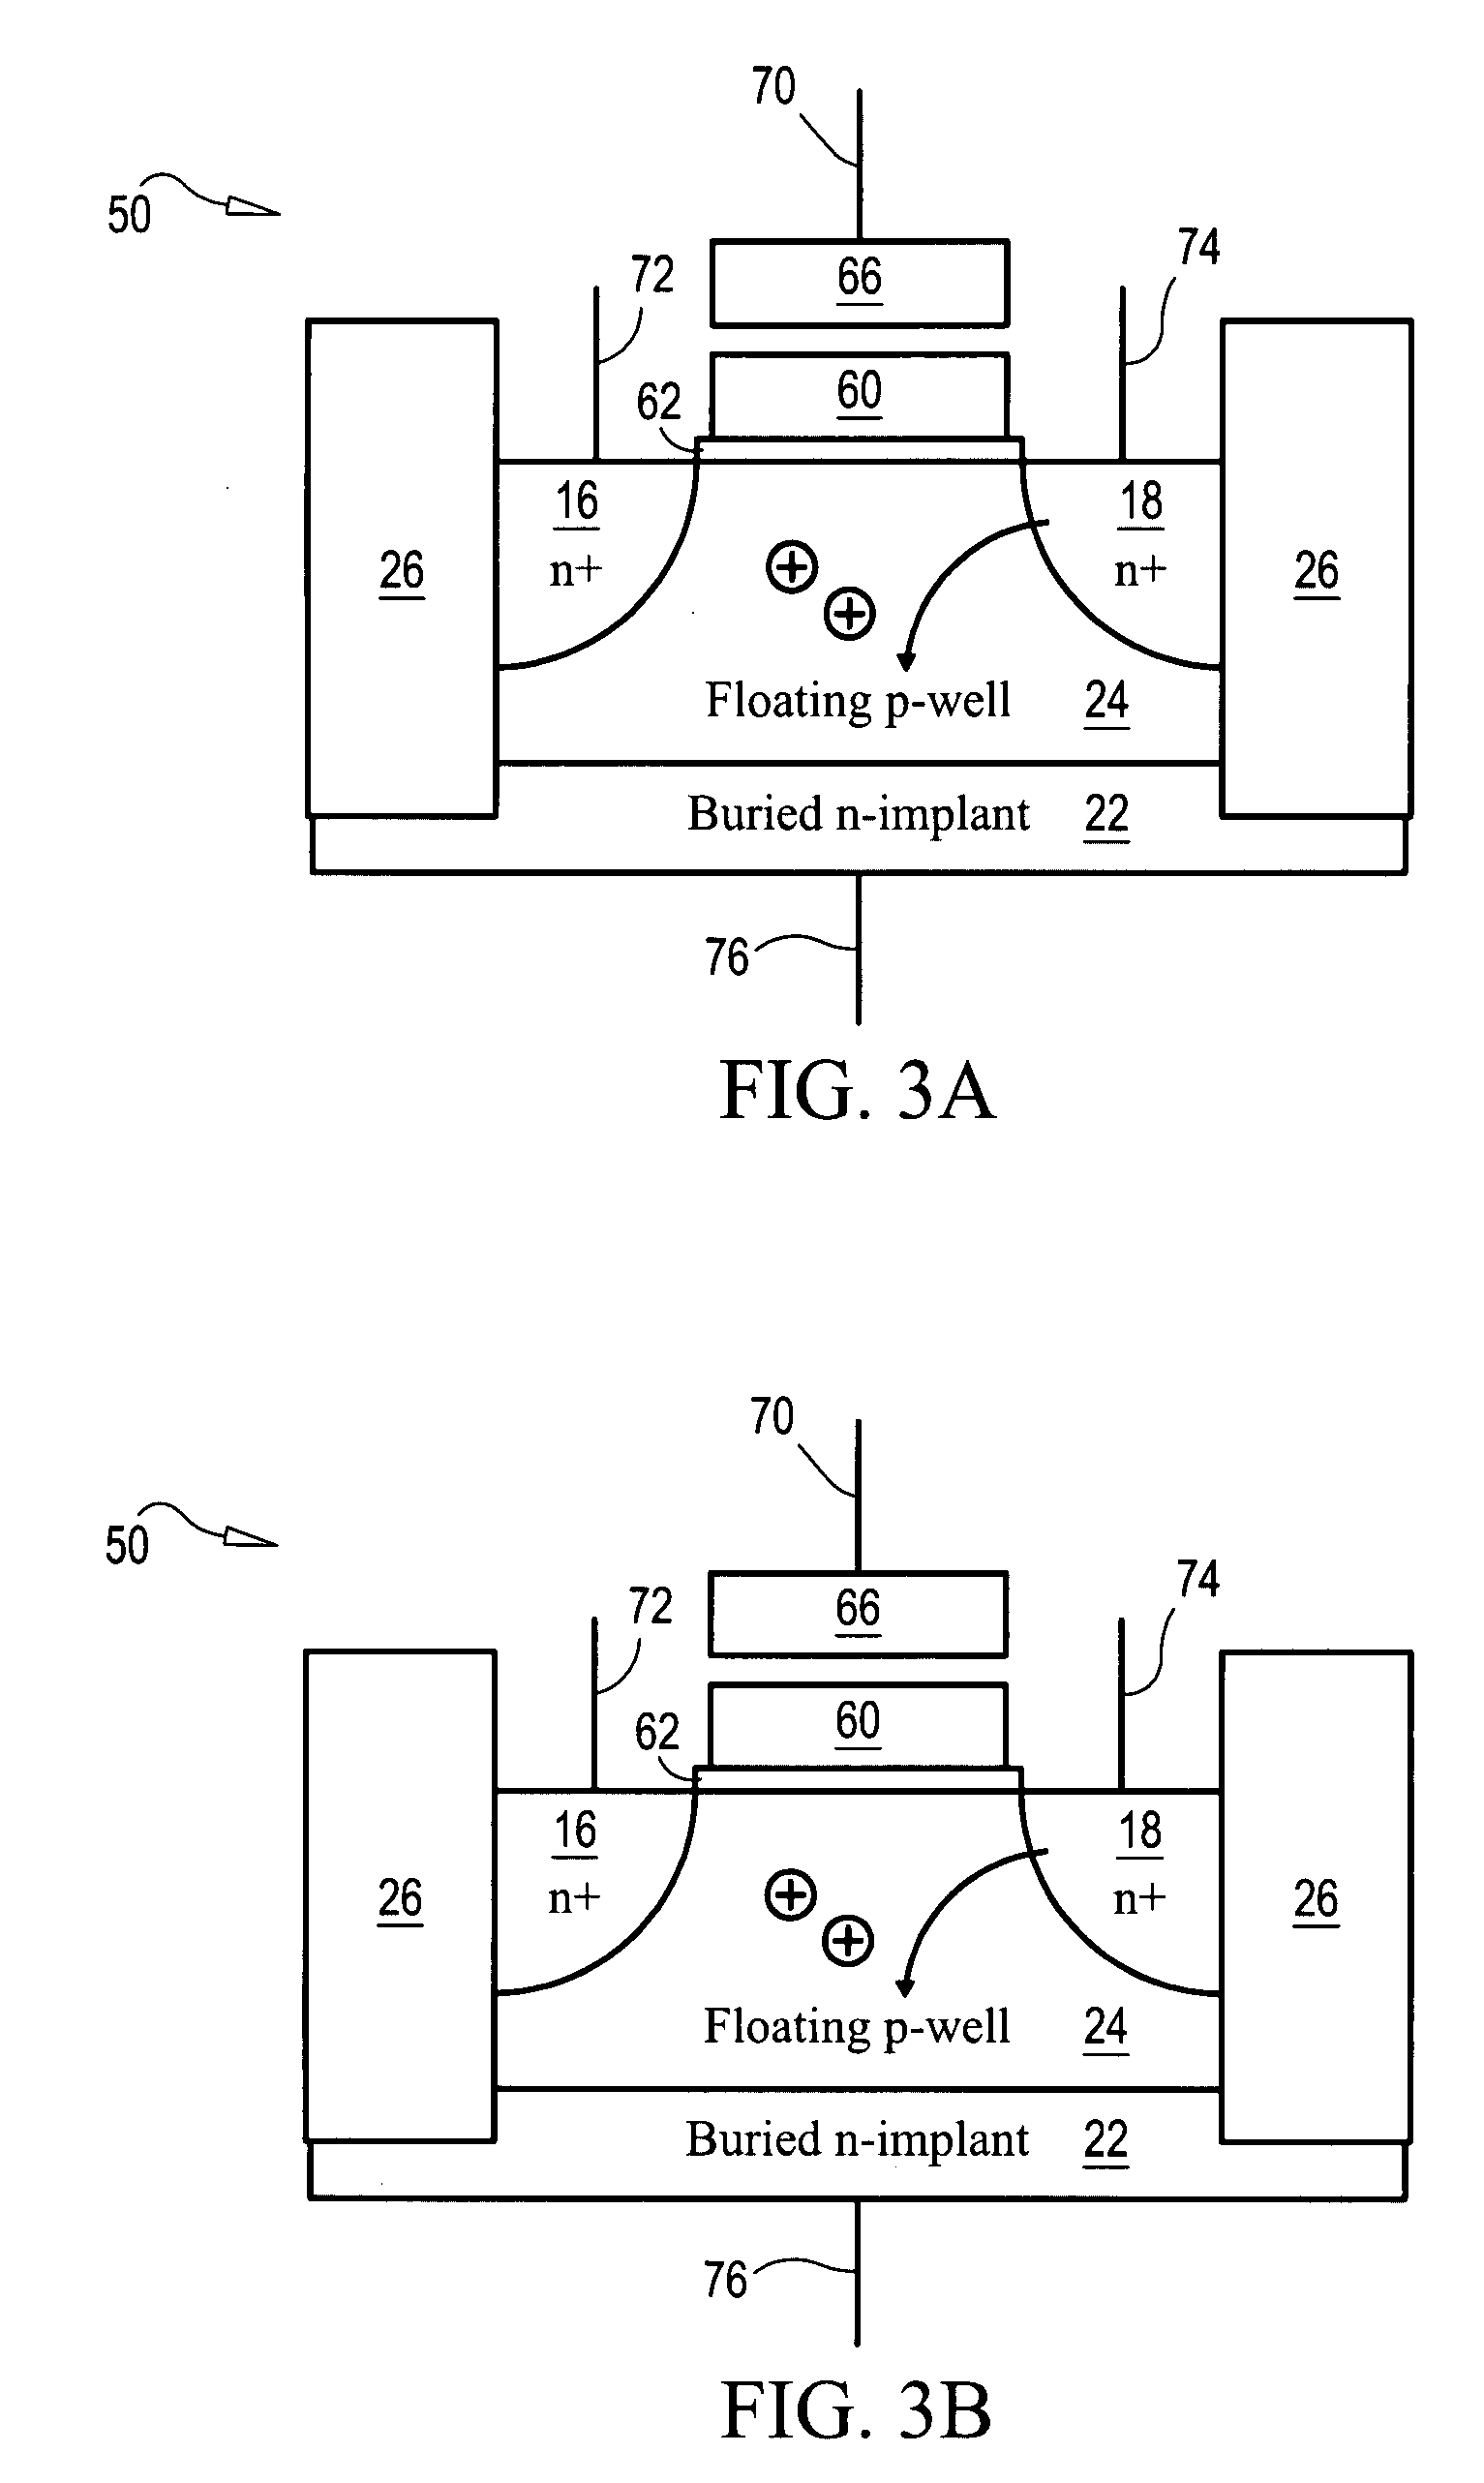 Semiconductor memory having both volatile and non-volatile functionality and method of operating